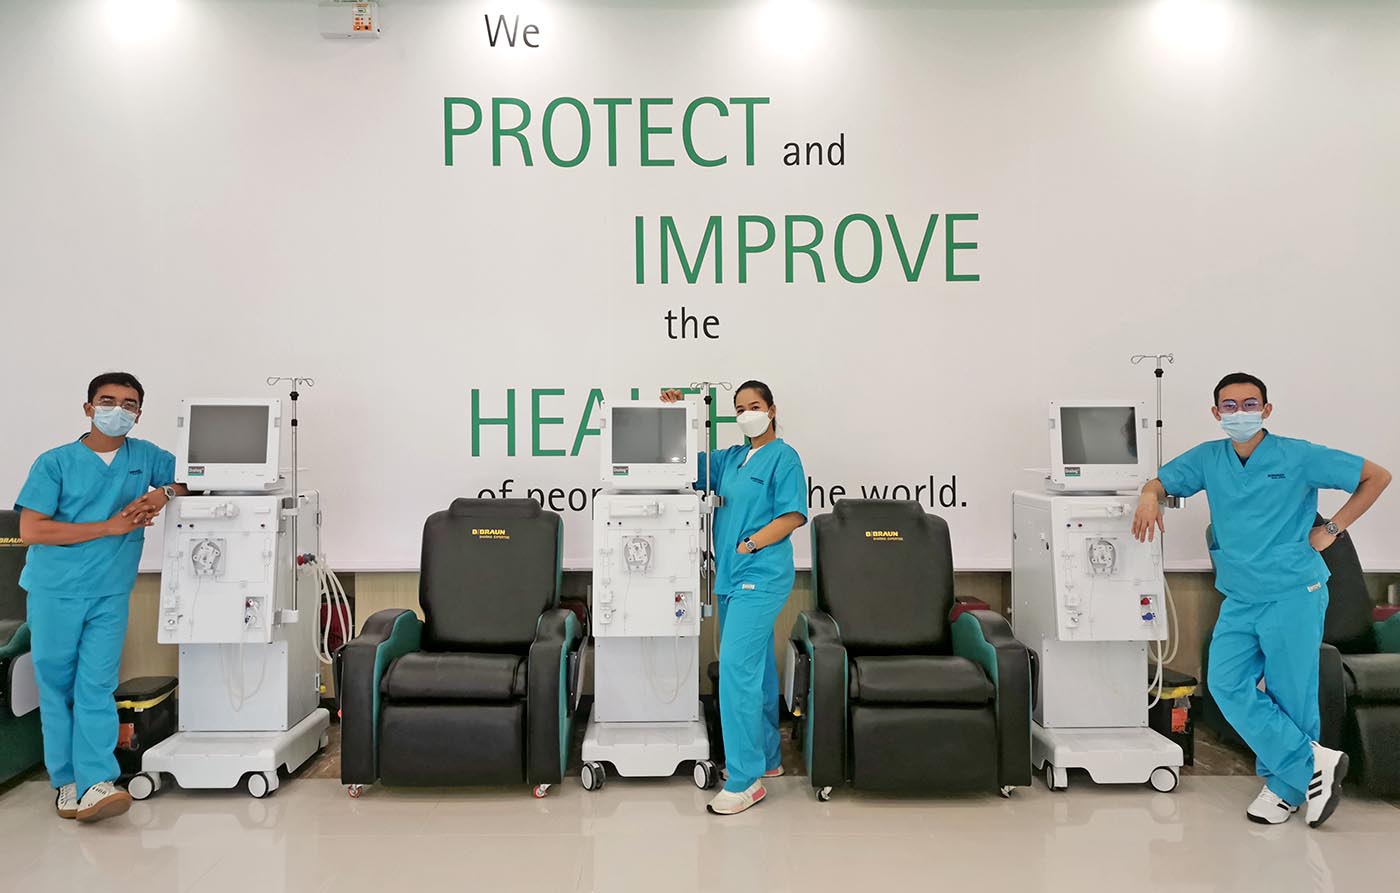 B. Braun Avitum Dialysis continues to expand to protect and improve the health of CKD patients despite the pandemic